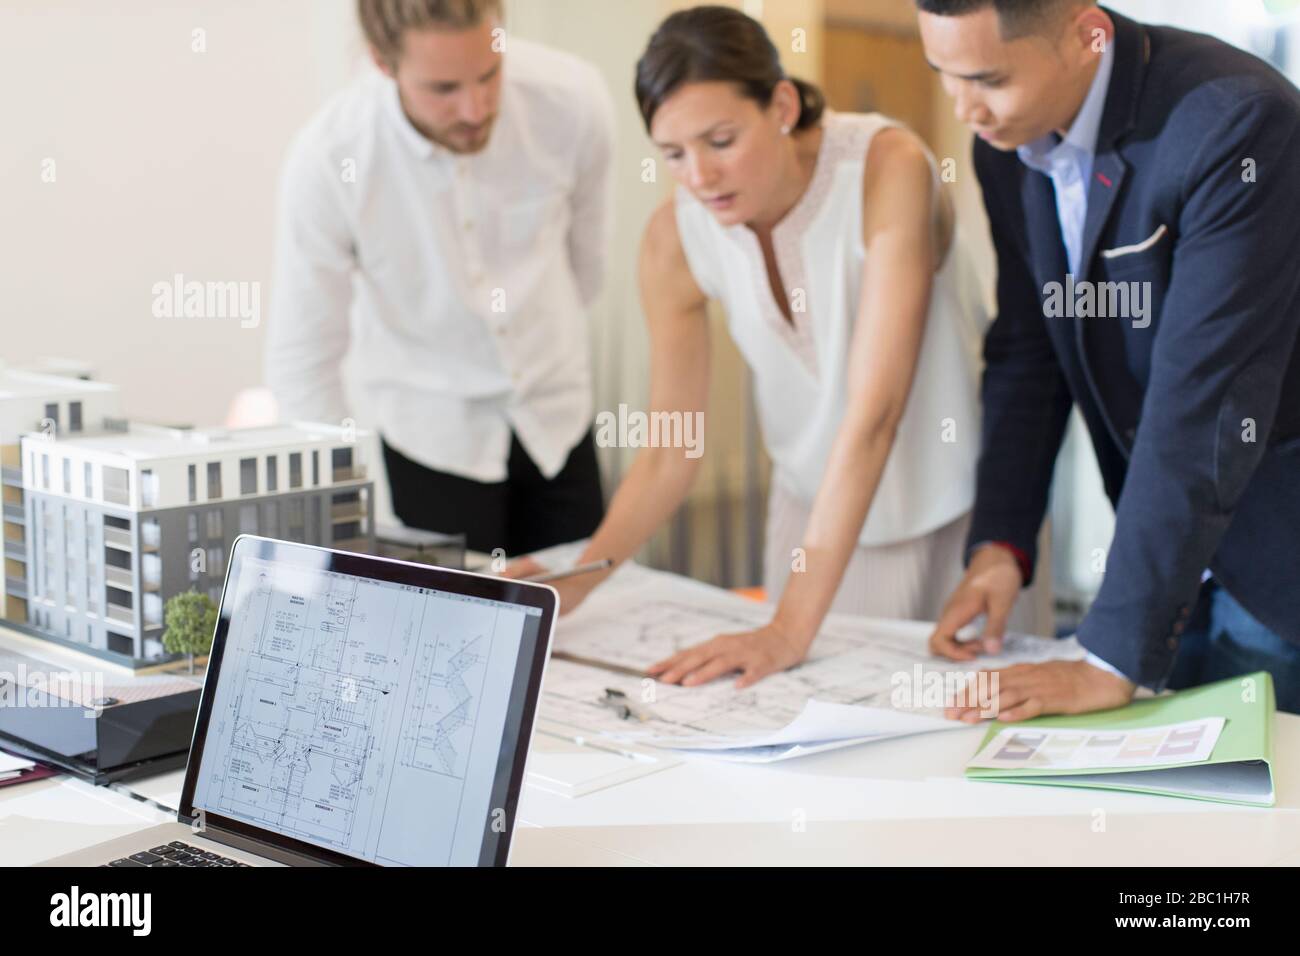 Architects discussing blueprints in meeting Stock Photo